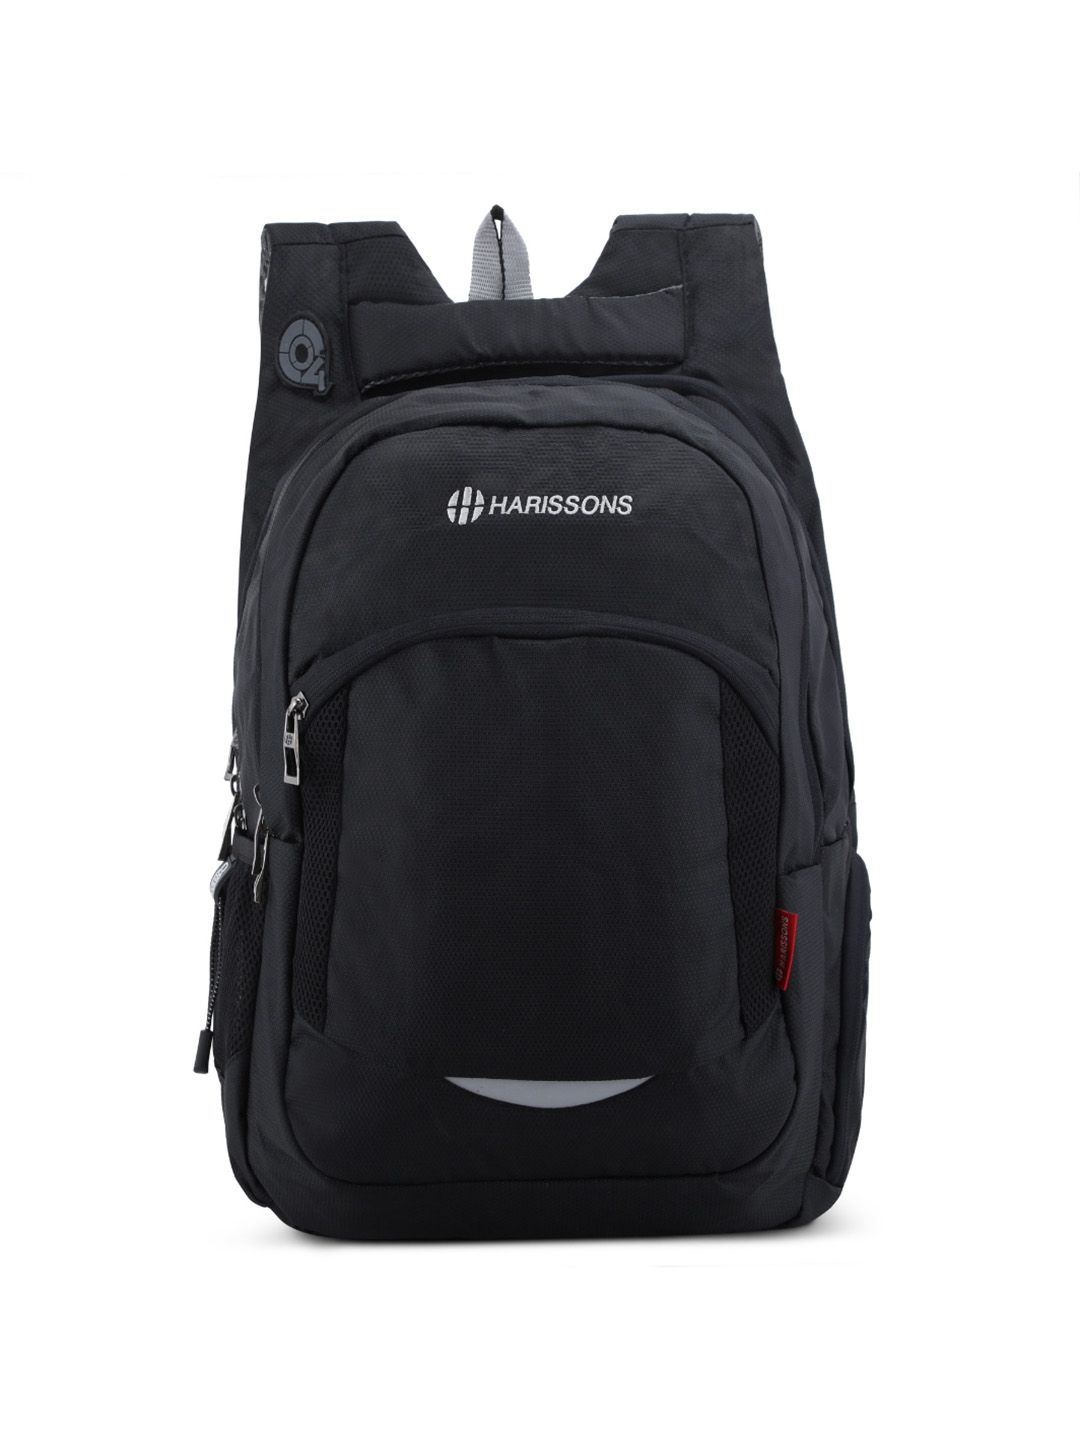 Harissons Unisex Black Colourblocked Backpack Price in India